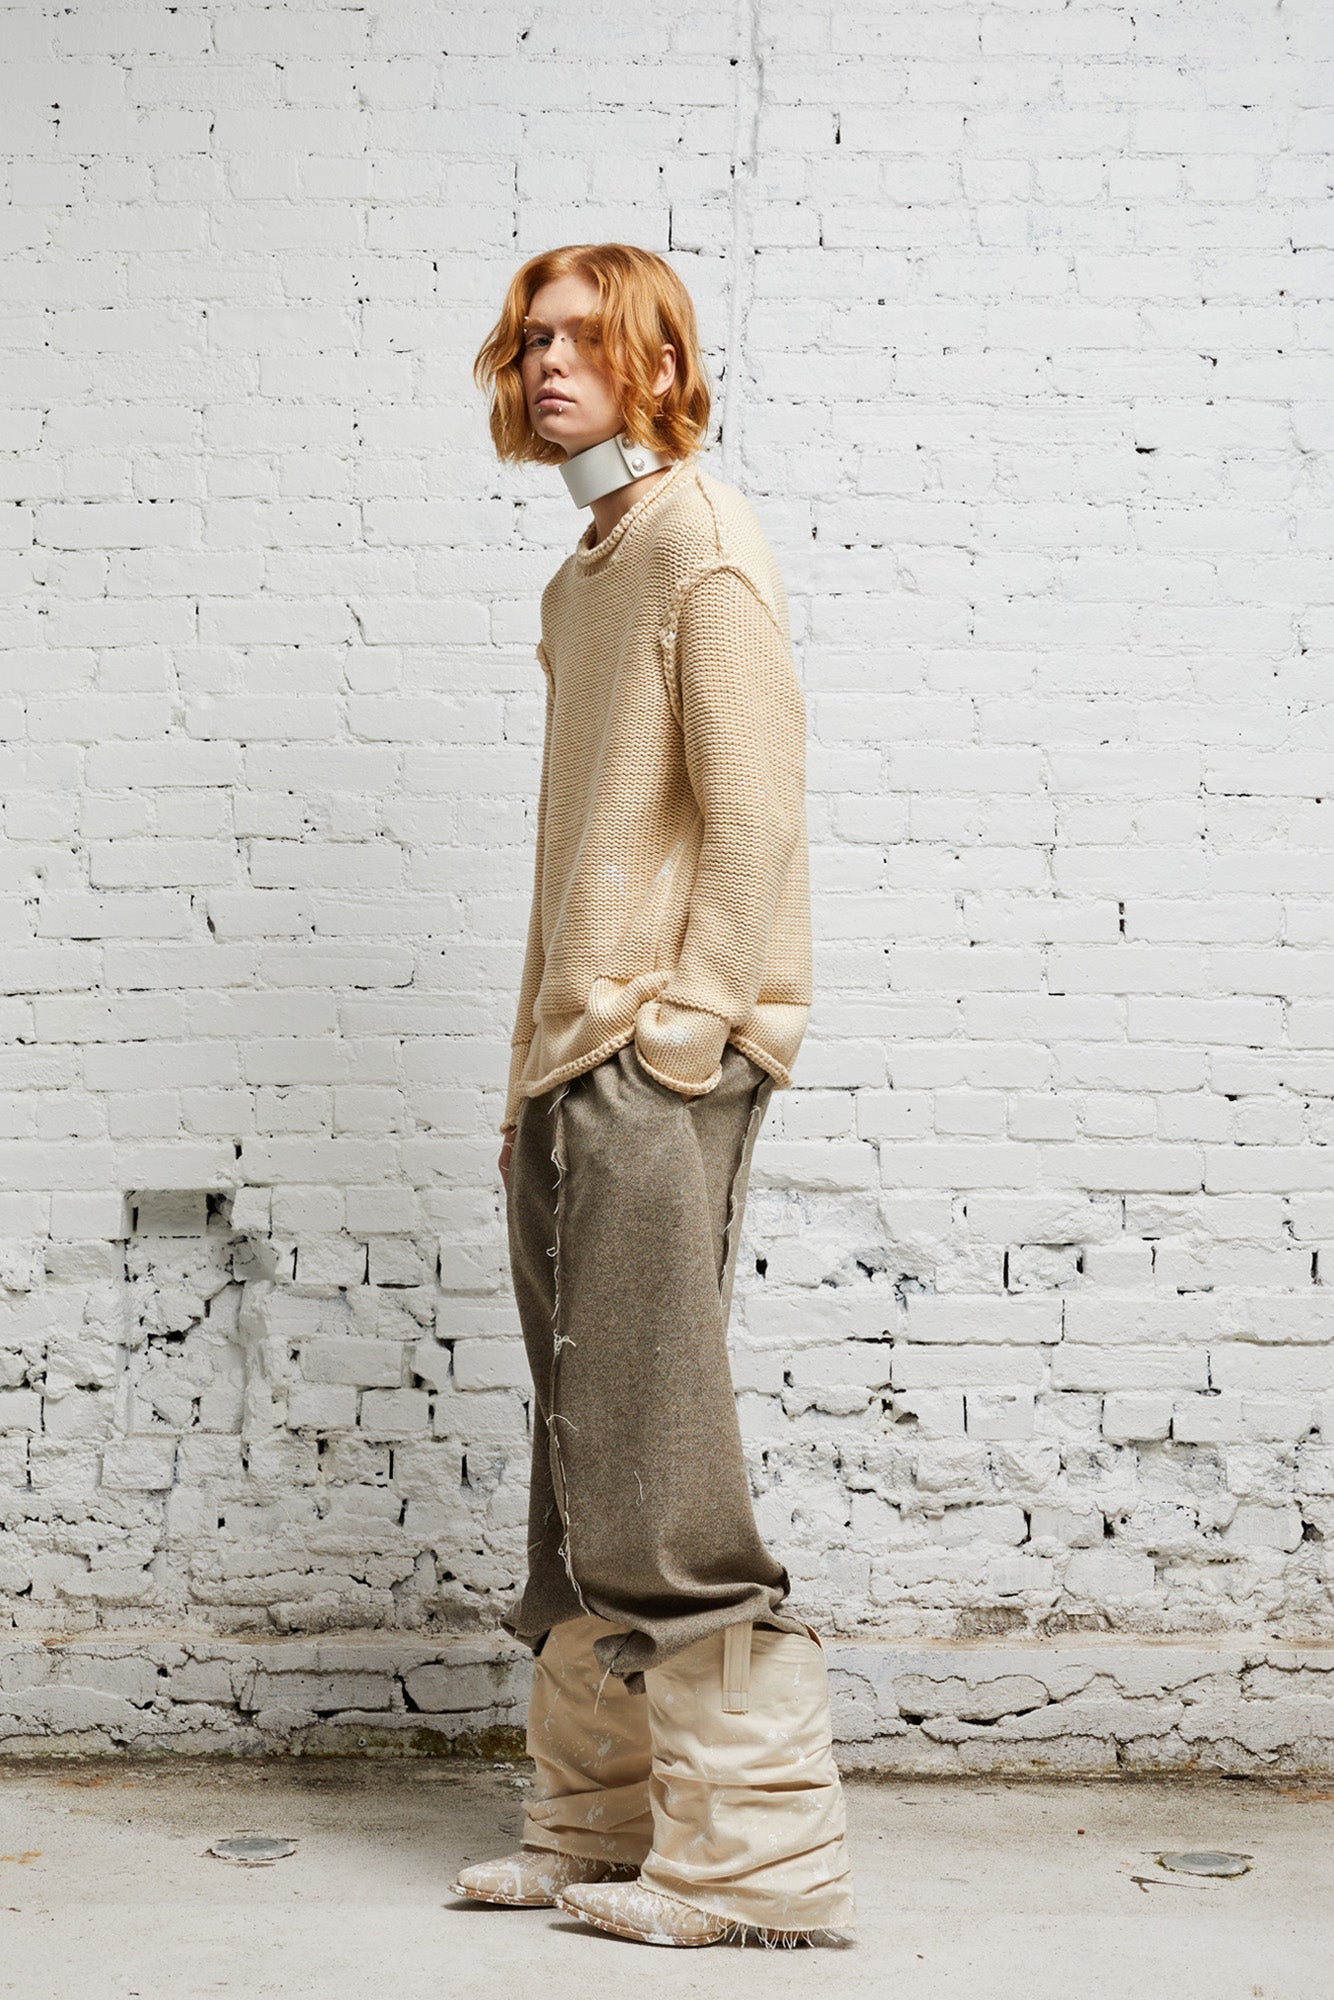 ROLLED EDGE BOXY SWEATER - NATURAL